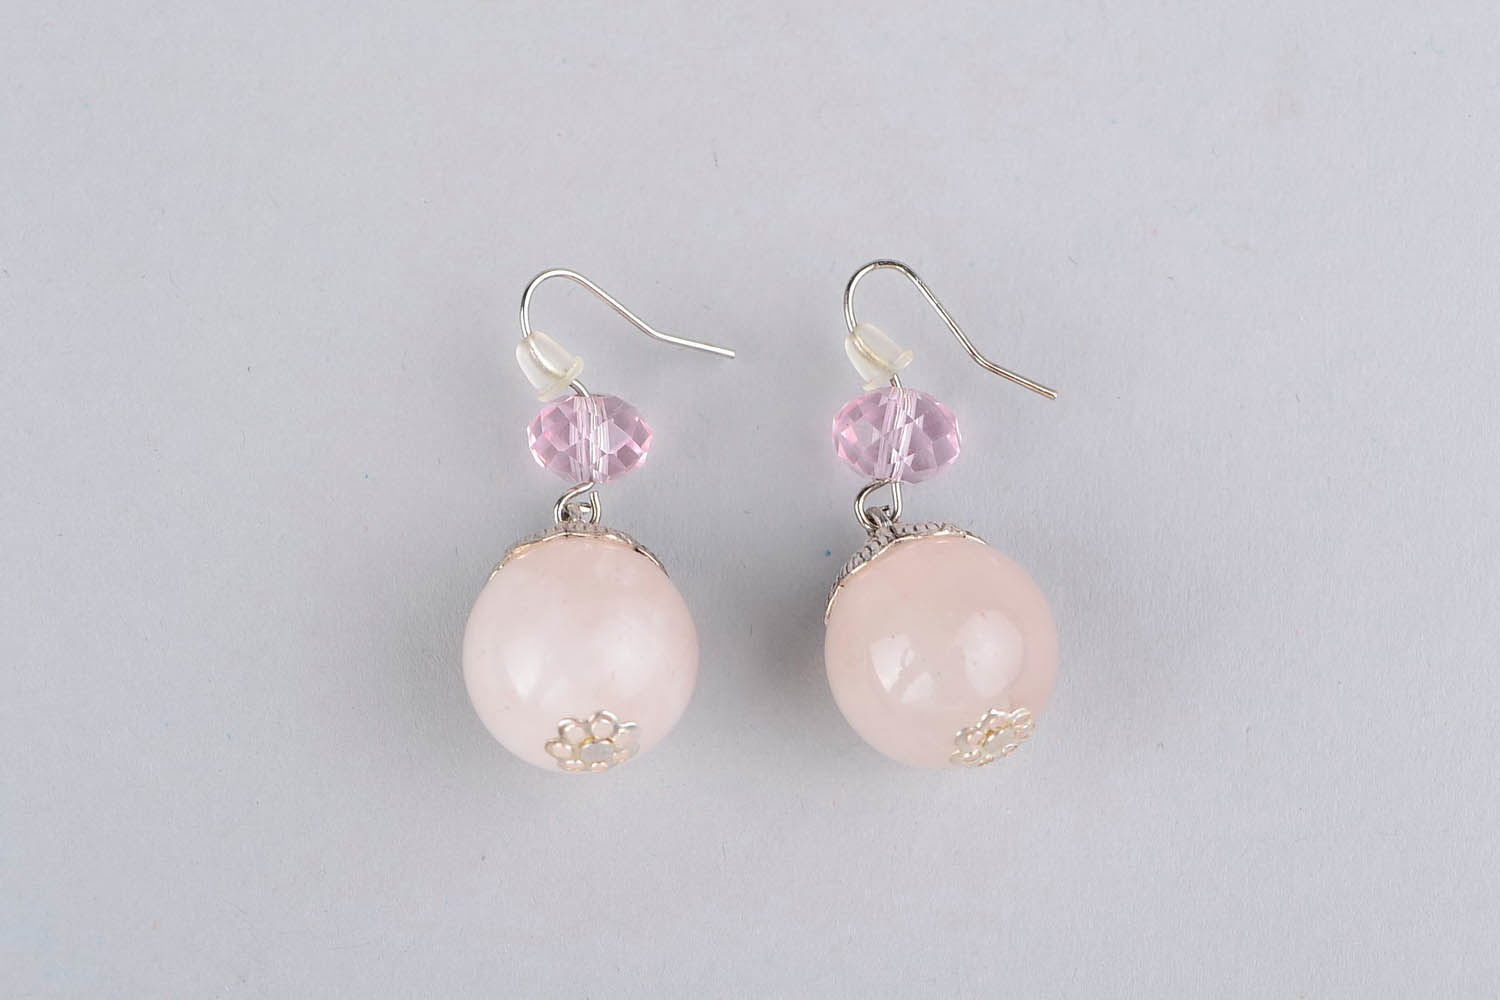 Earrings of rose quartz and Czech crystal photo 4